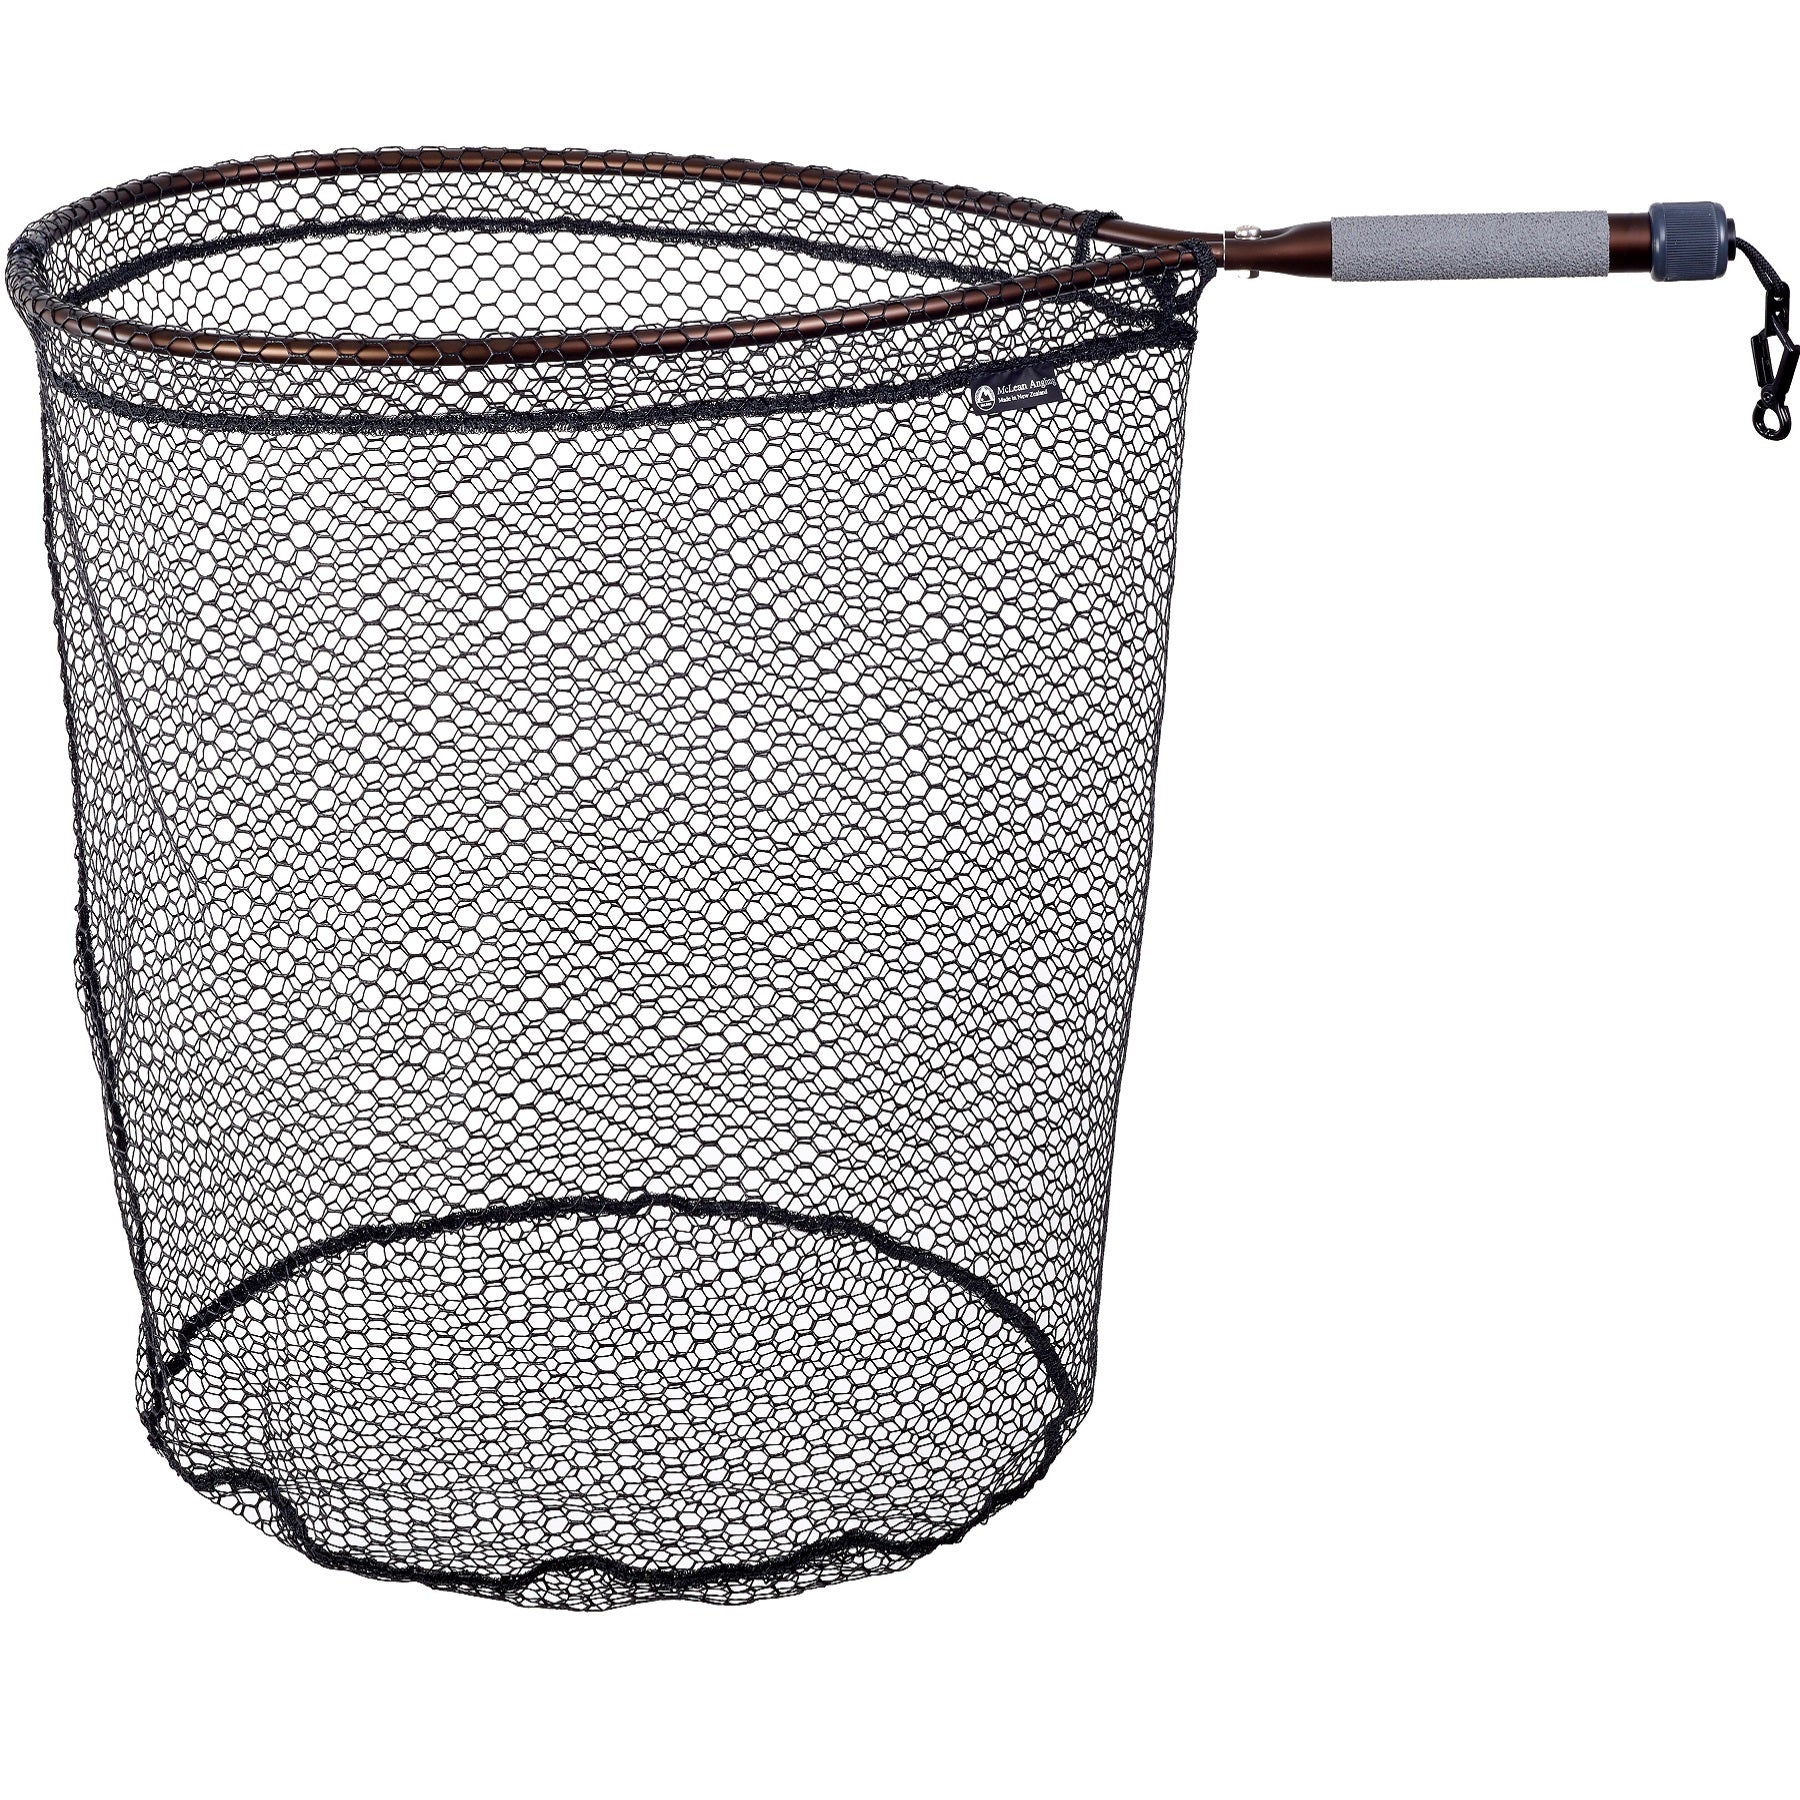 McLean Angling Rubber Mesh Bronze Short Handle Net - LARGE - Mansfield Hunting & Fishing - Products to prepare for Corona Virus